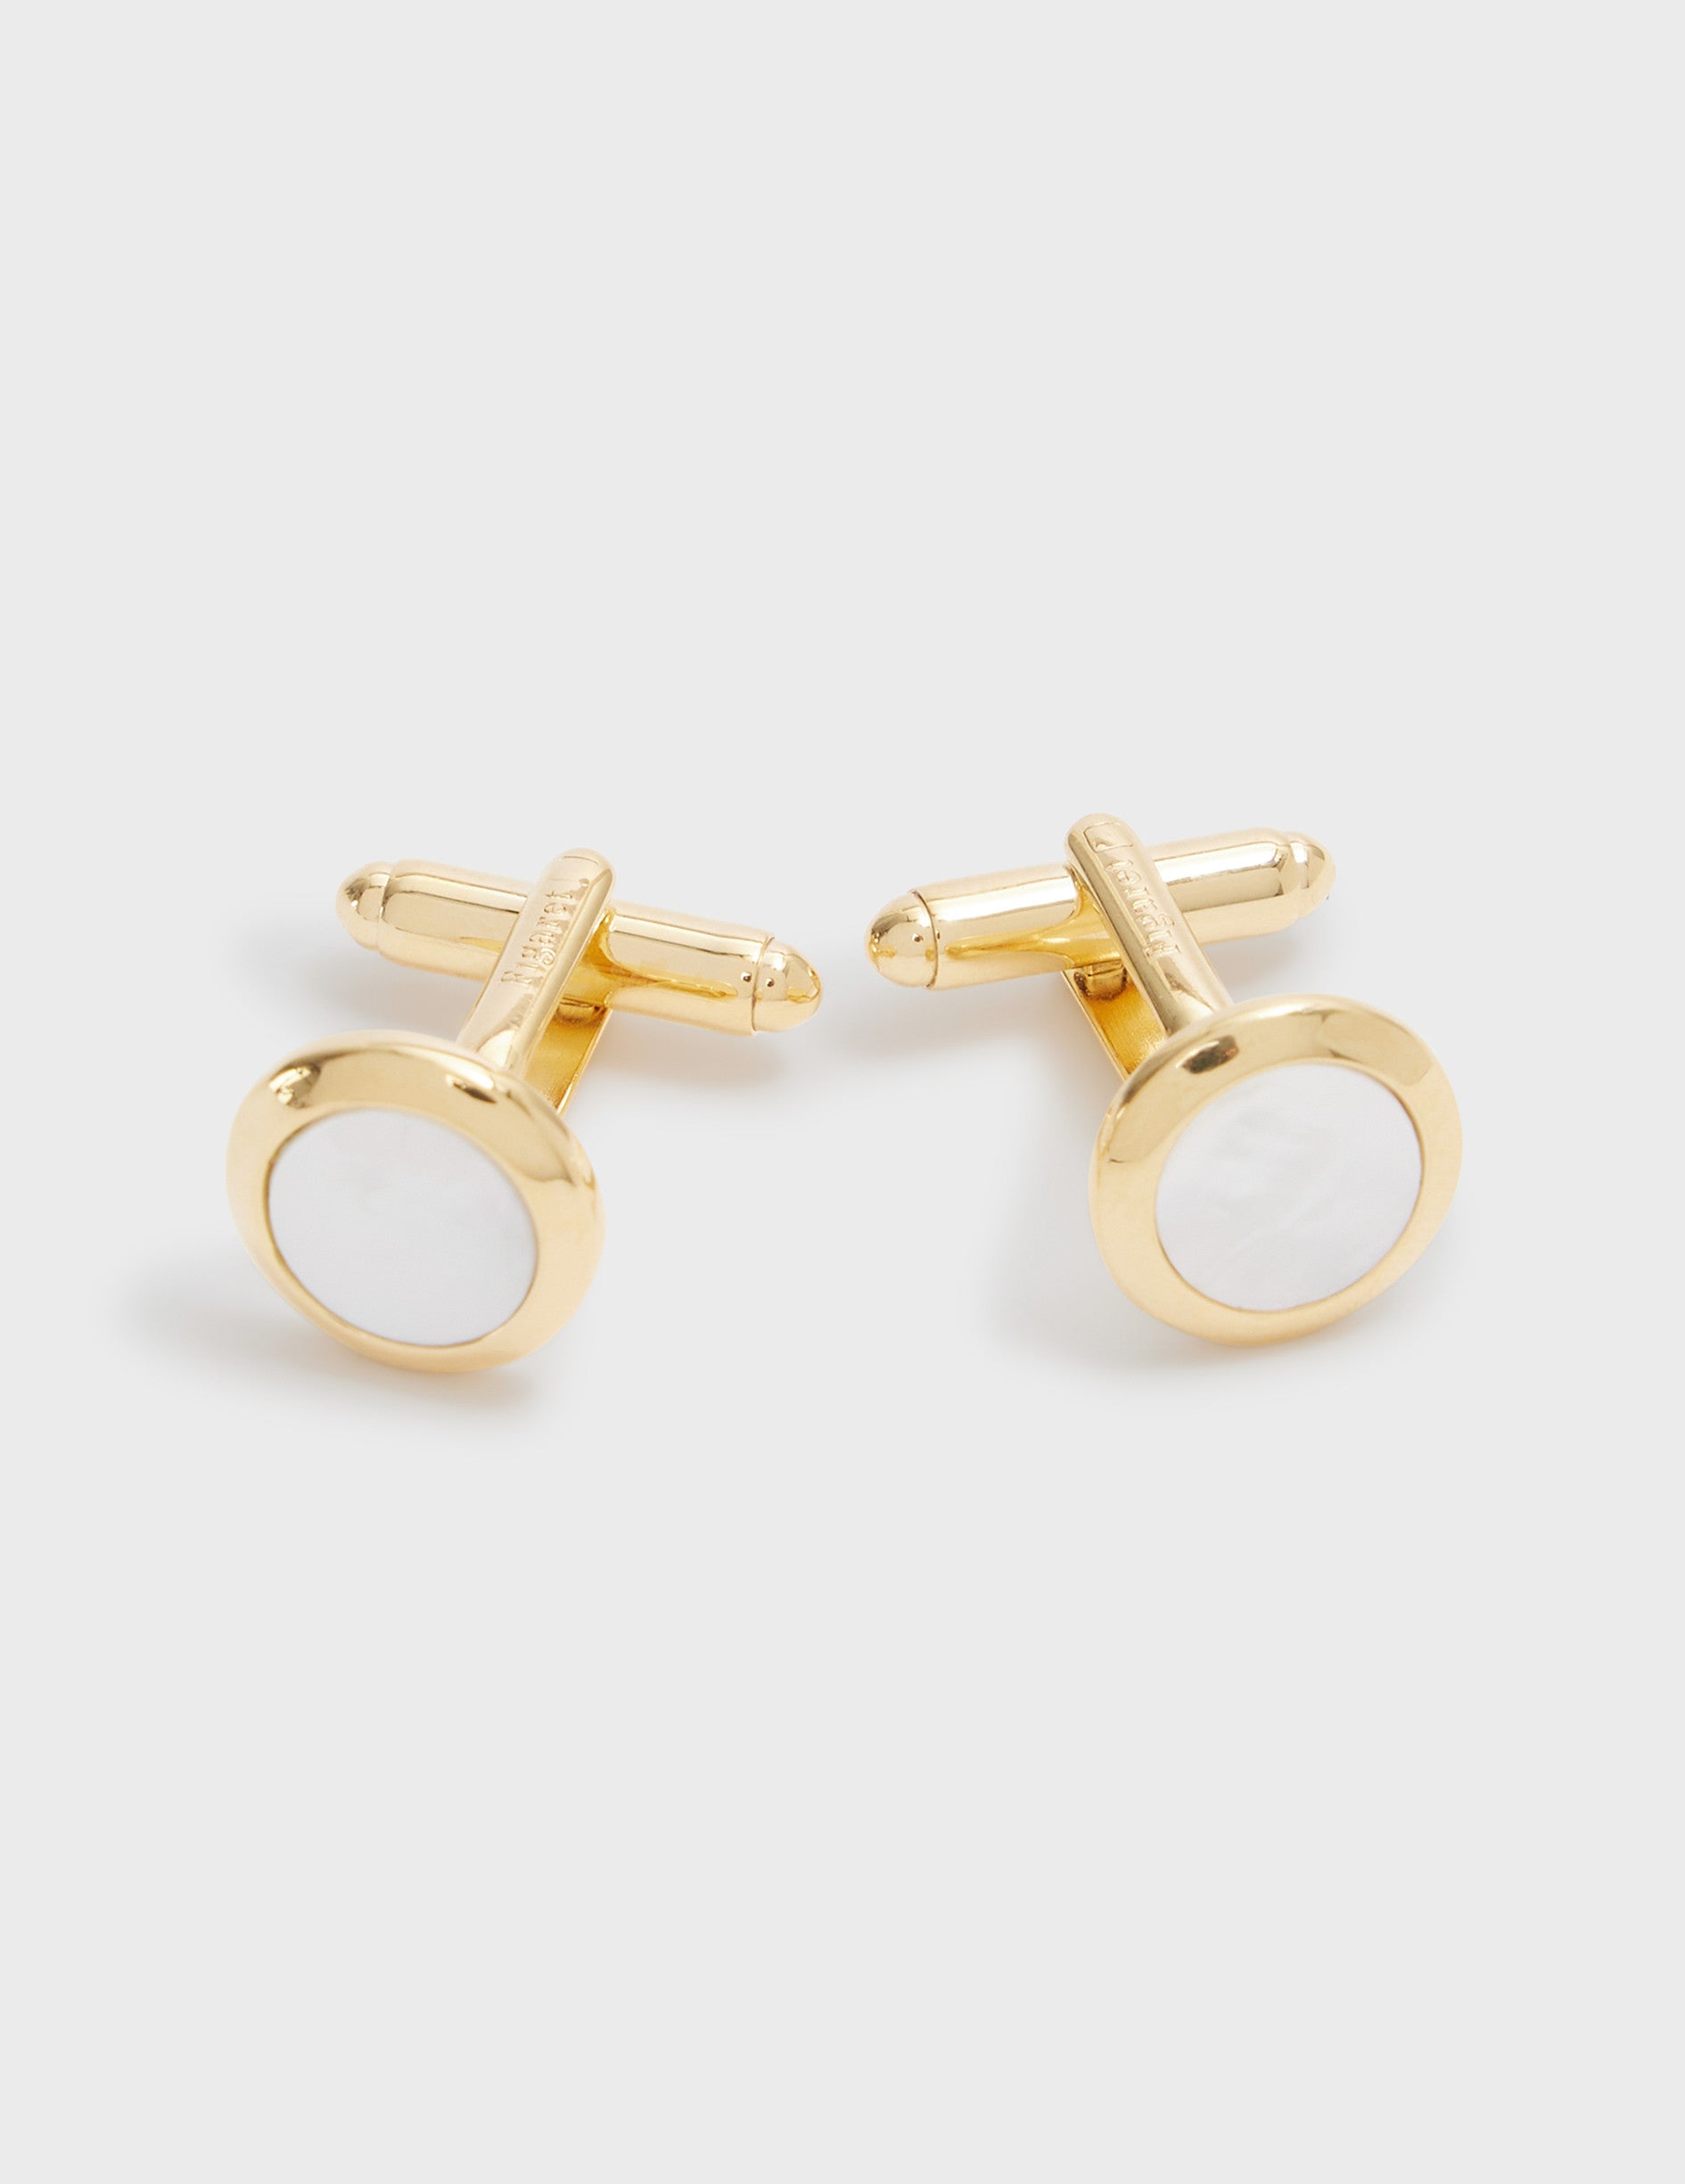 Gold and mother-of-pearl cufflinks